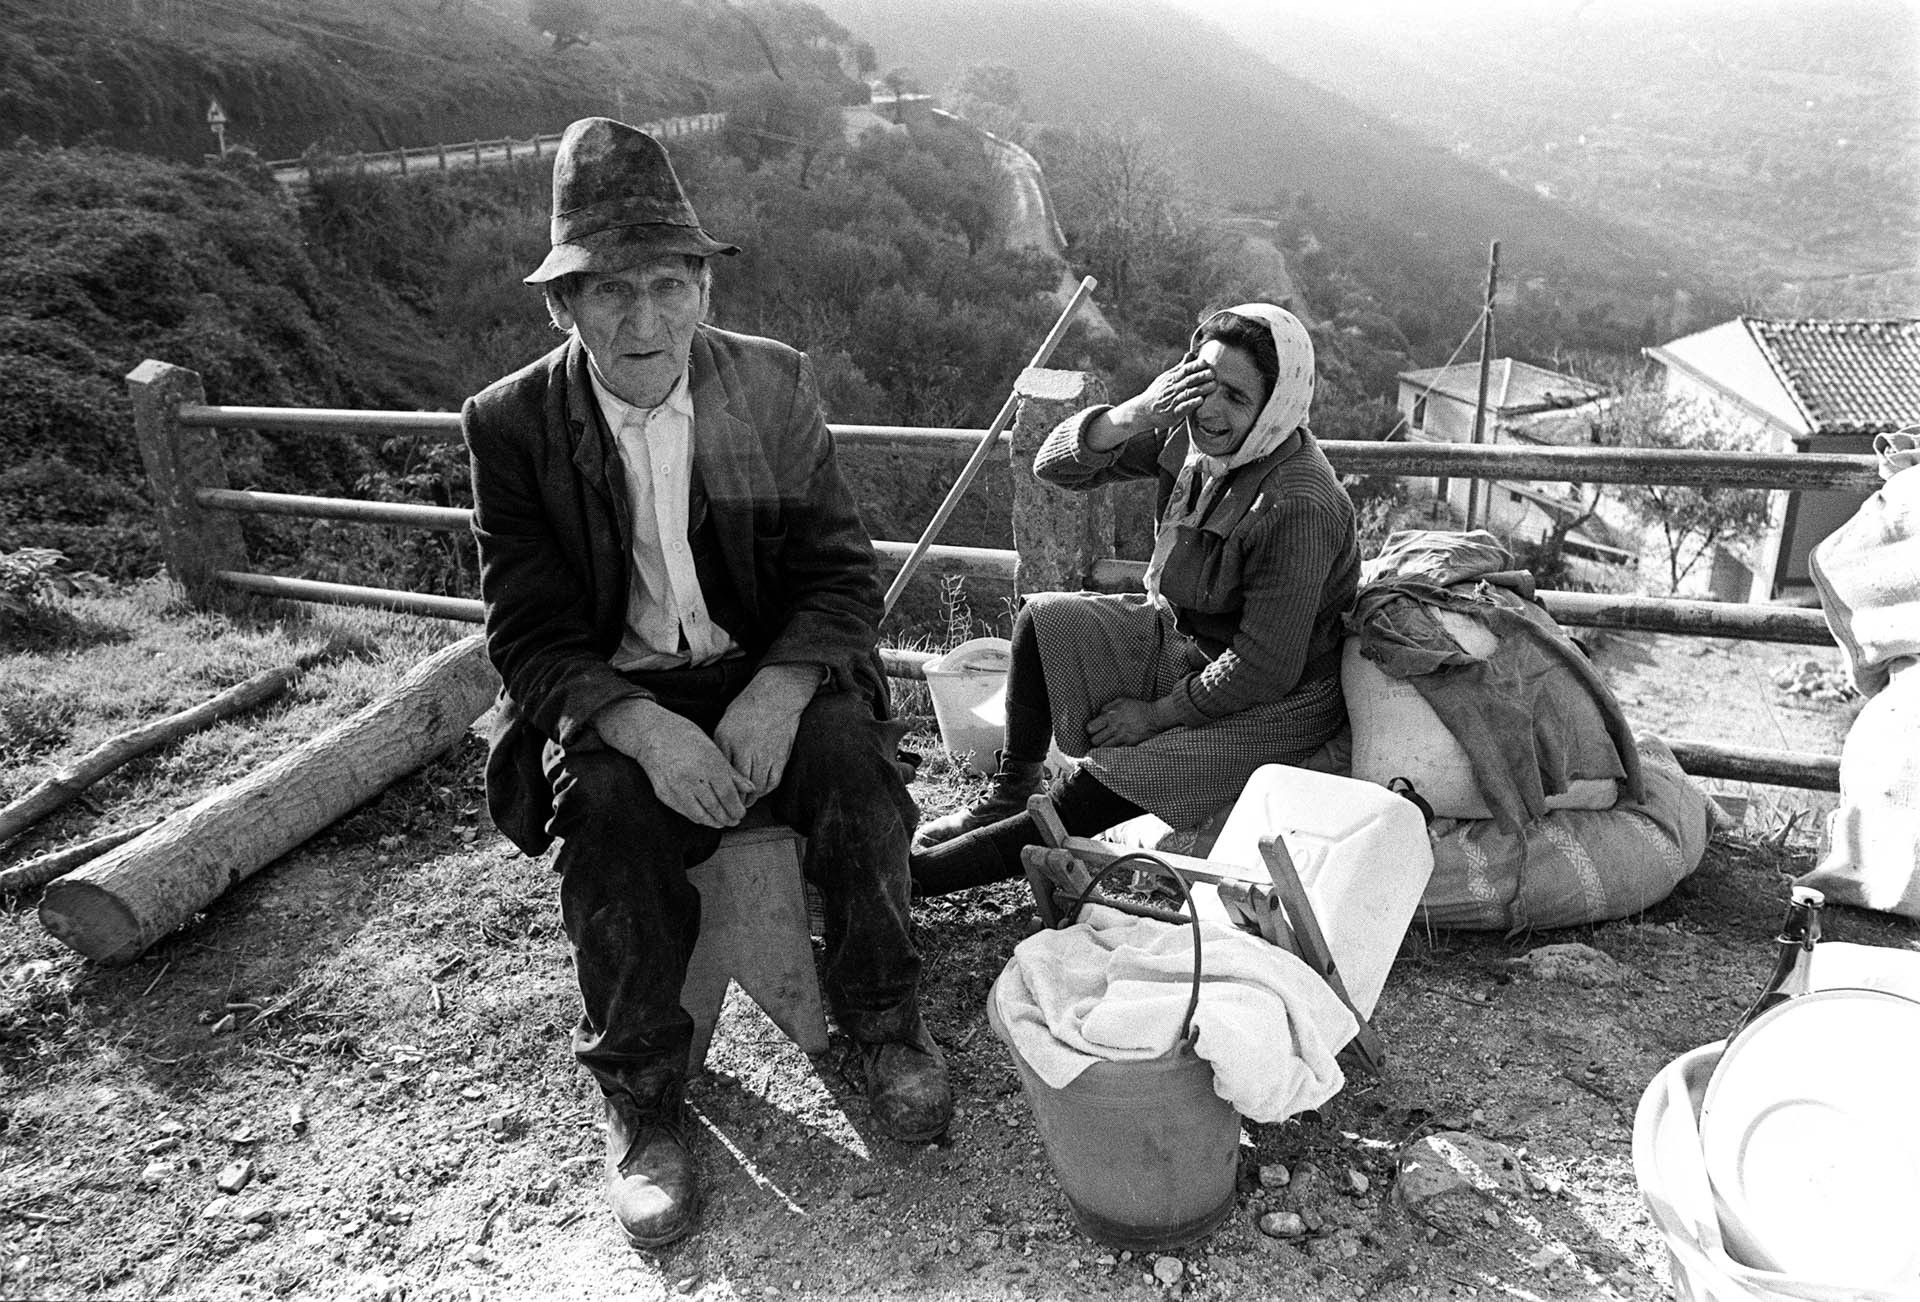  Basilicata, 24 November 1980
At 19,35 pm of the night of 23 November, the biggest earthquake in Italy destroys a large part of Campania and Basilicate towns and villages. More than 3000 people dead, 250,000 homeless. 
© GIANNI GIANSANTI 